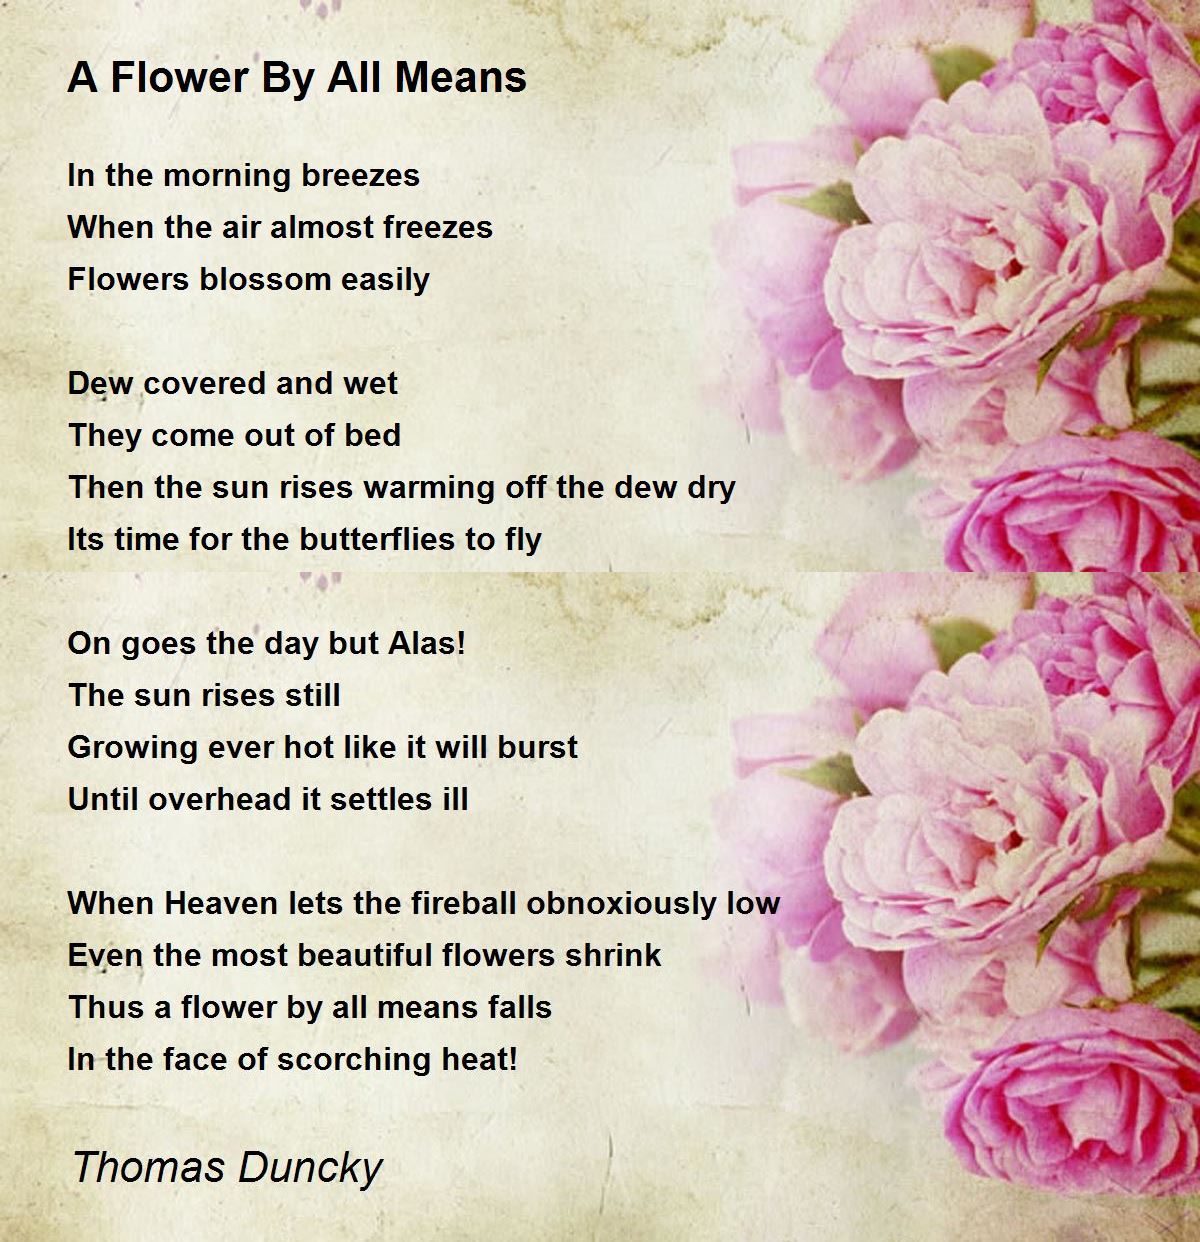 A Flower By All Means Poem Thomas Duncky